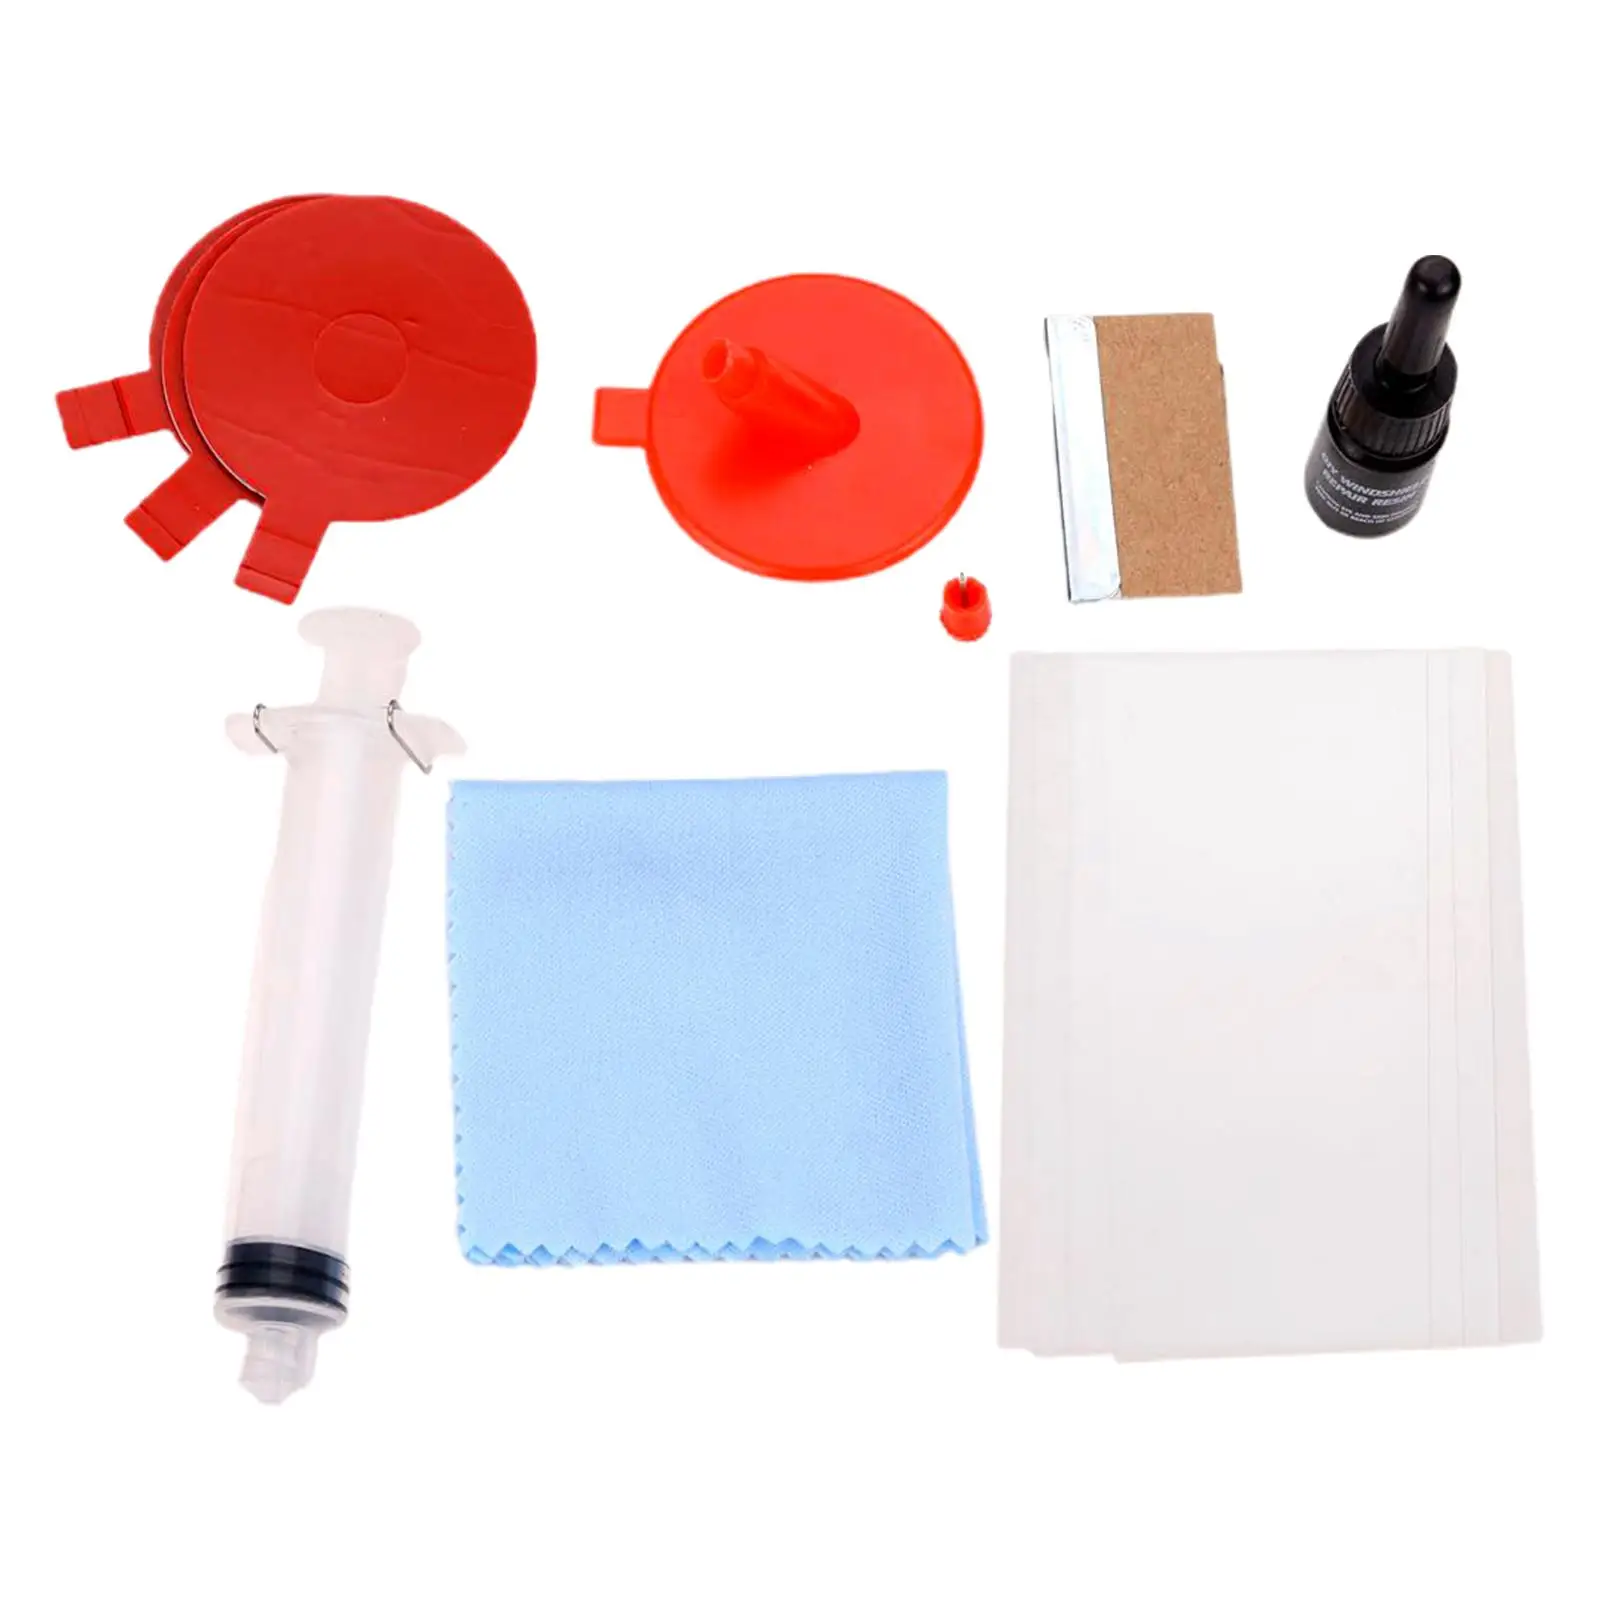 Automotive Windshield Repair Kit Remover kit for Fixing Chips Long Line Crack